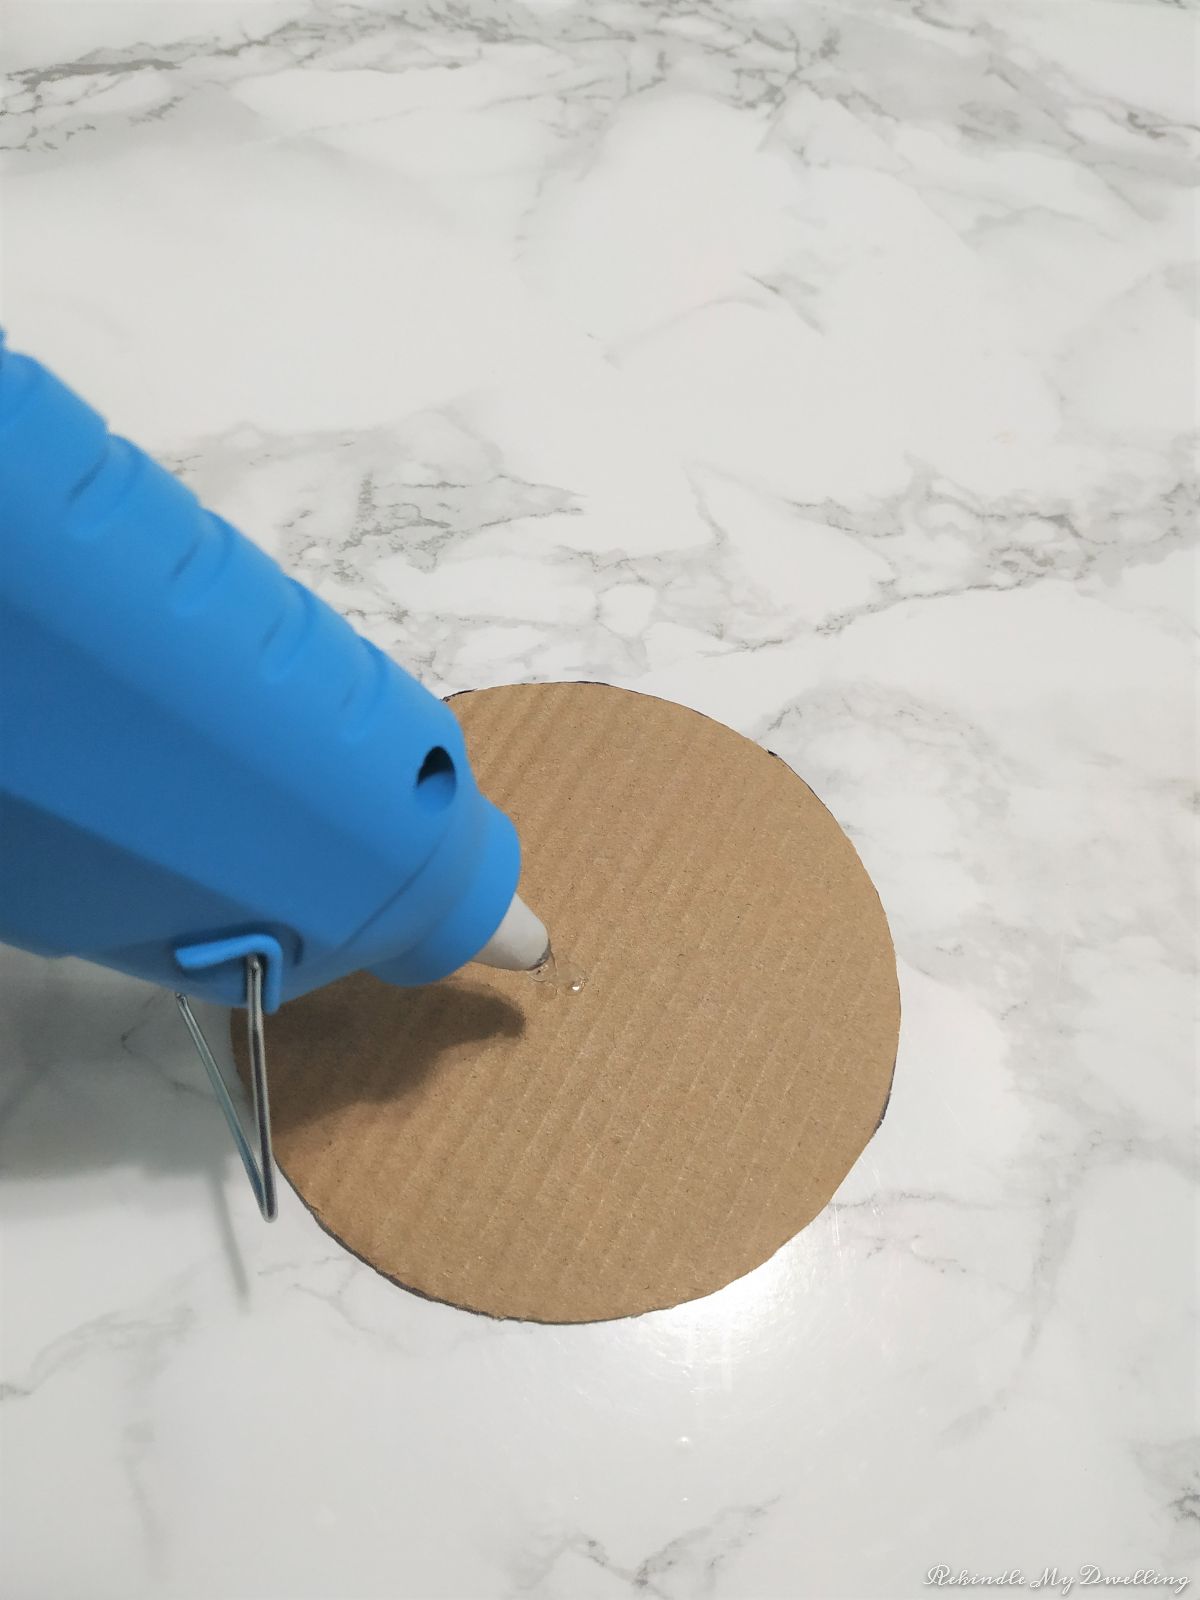 Adding a dab of hot glue to the middle of the circle cut out.